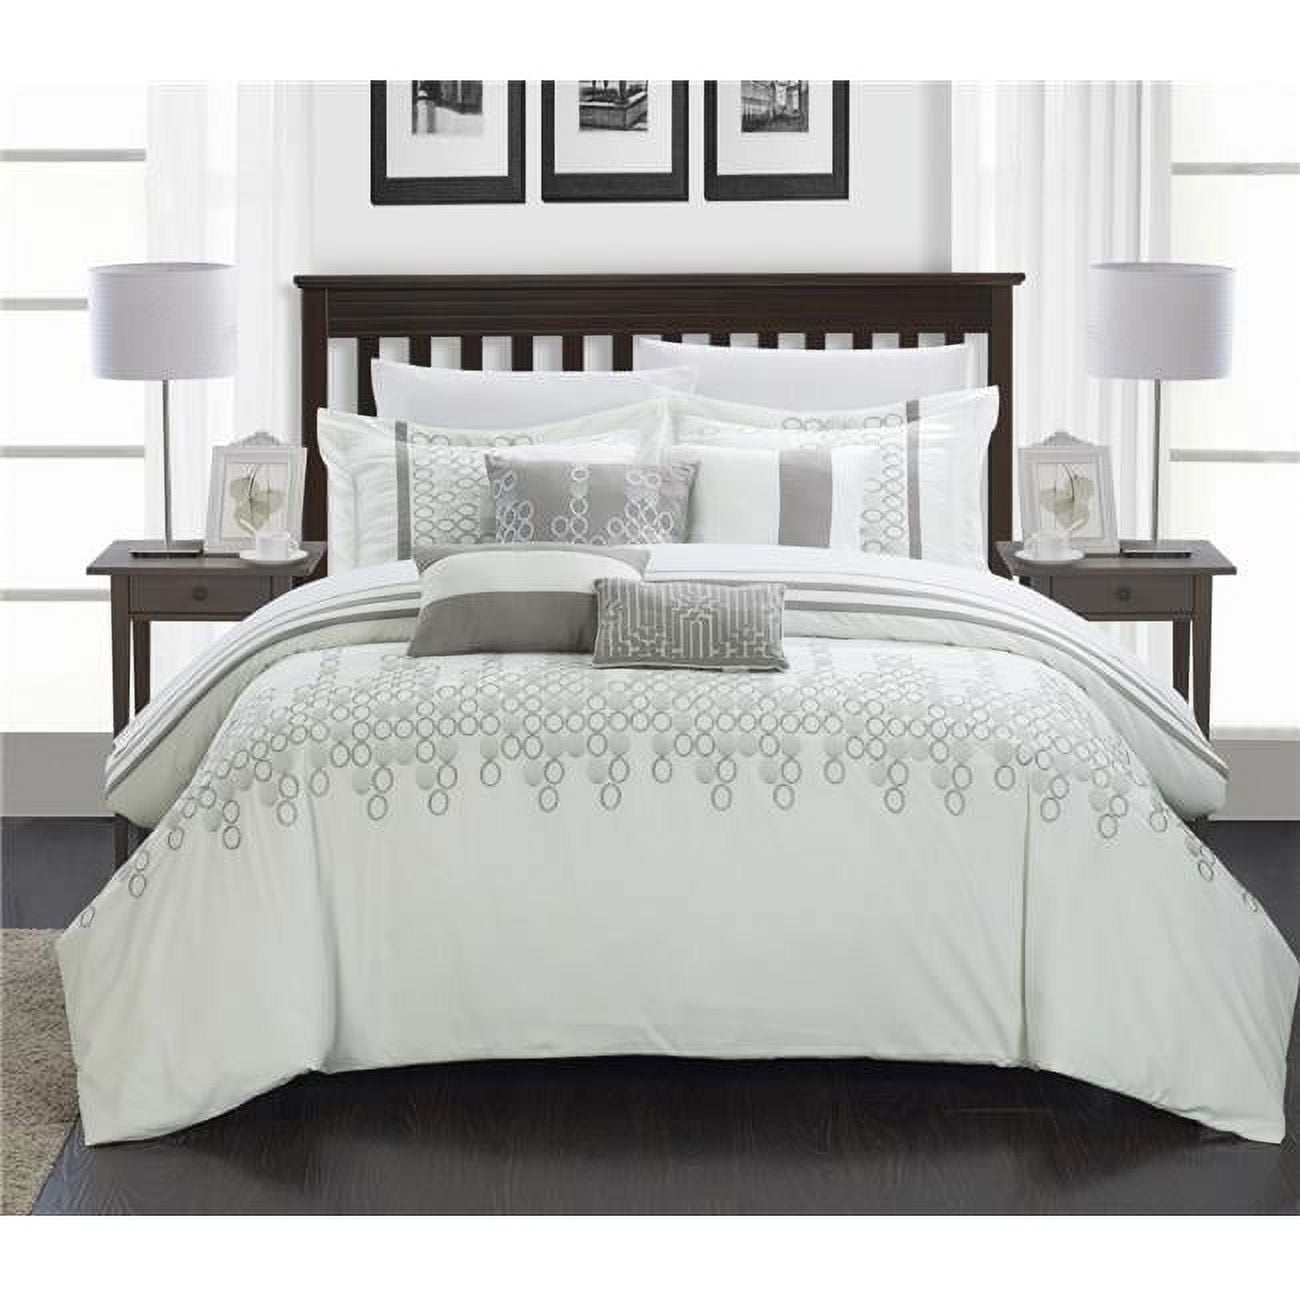 Cs3041-us Laura Embroidered Oversized Overfilled Comforter Set - White - Queen - 8 Piece